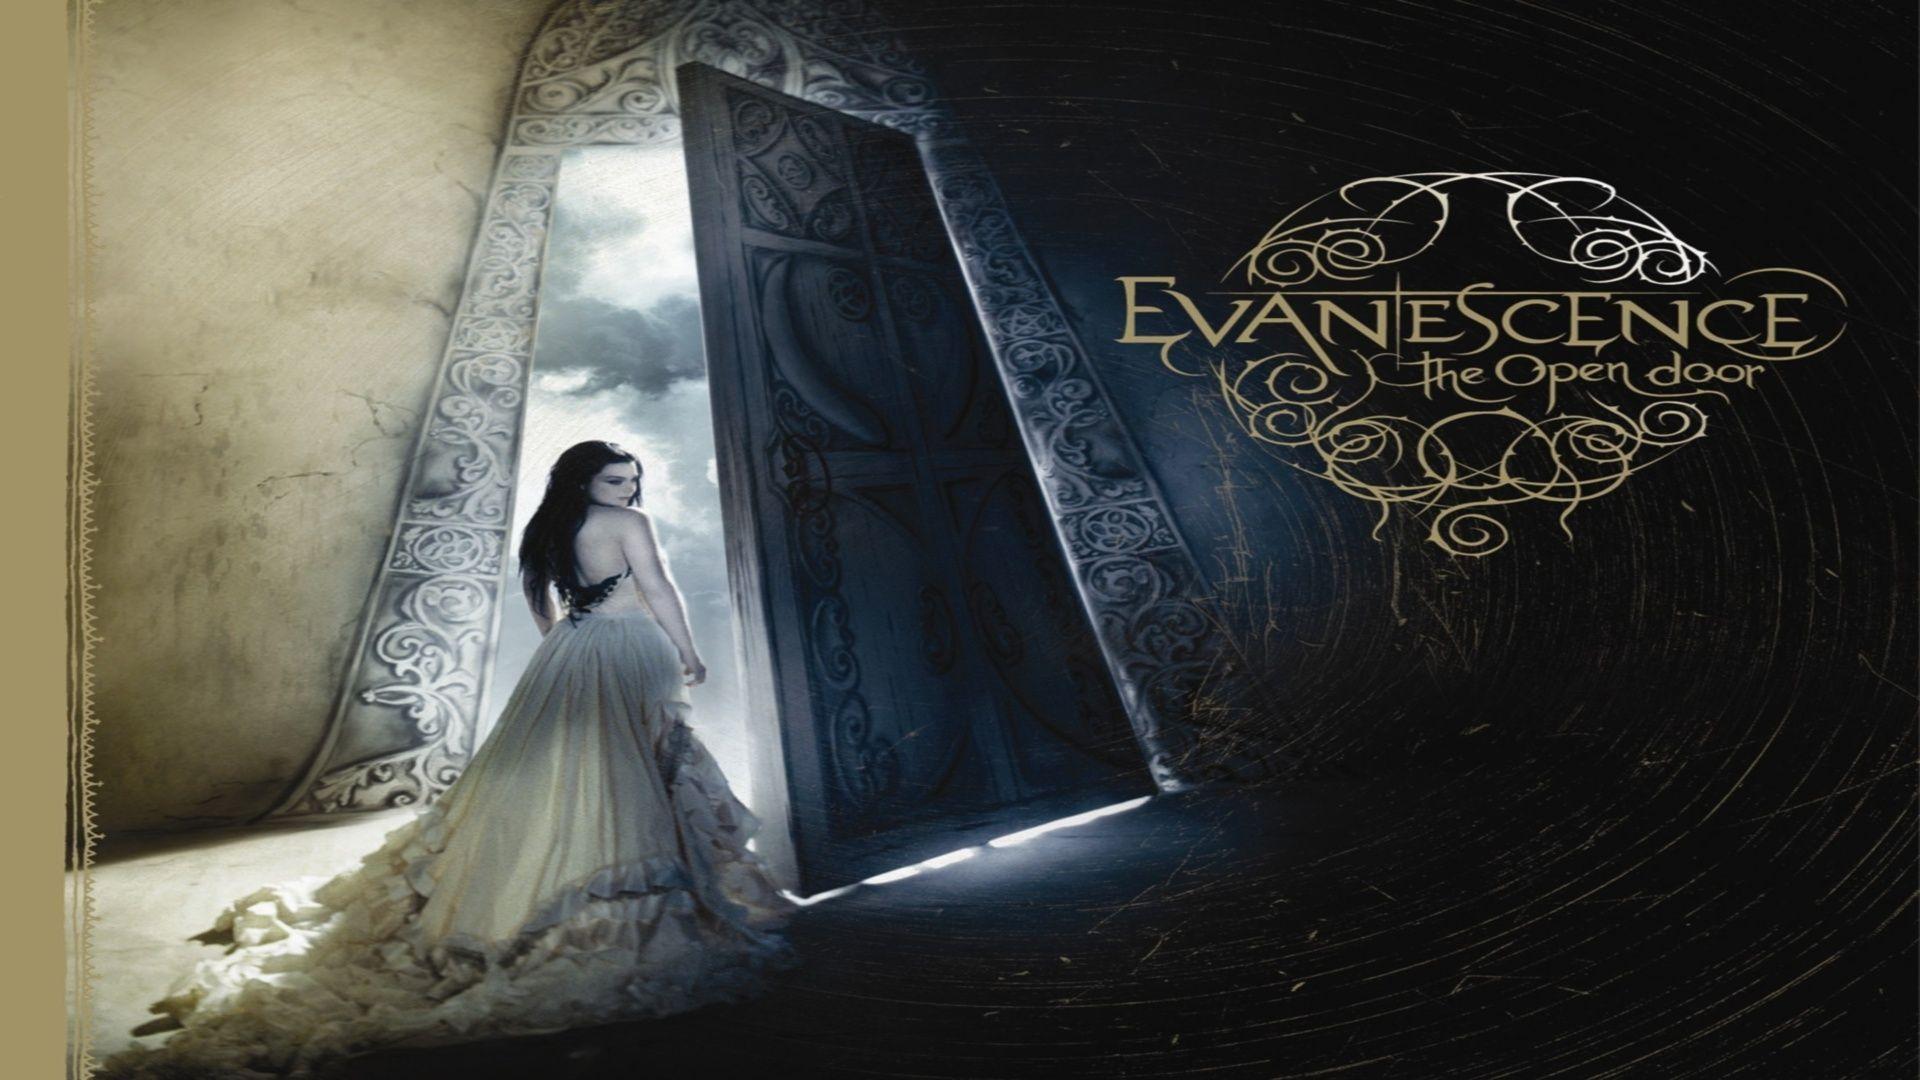 Evanescence 2017 Wallpapers - Wallpaper Cave